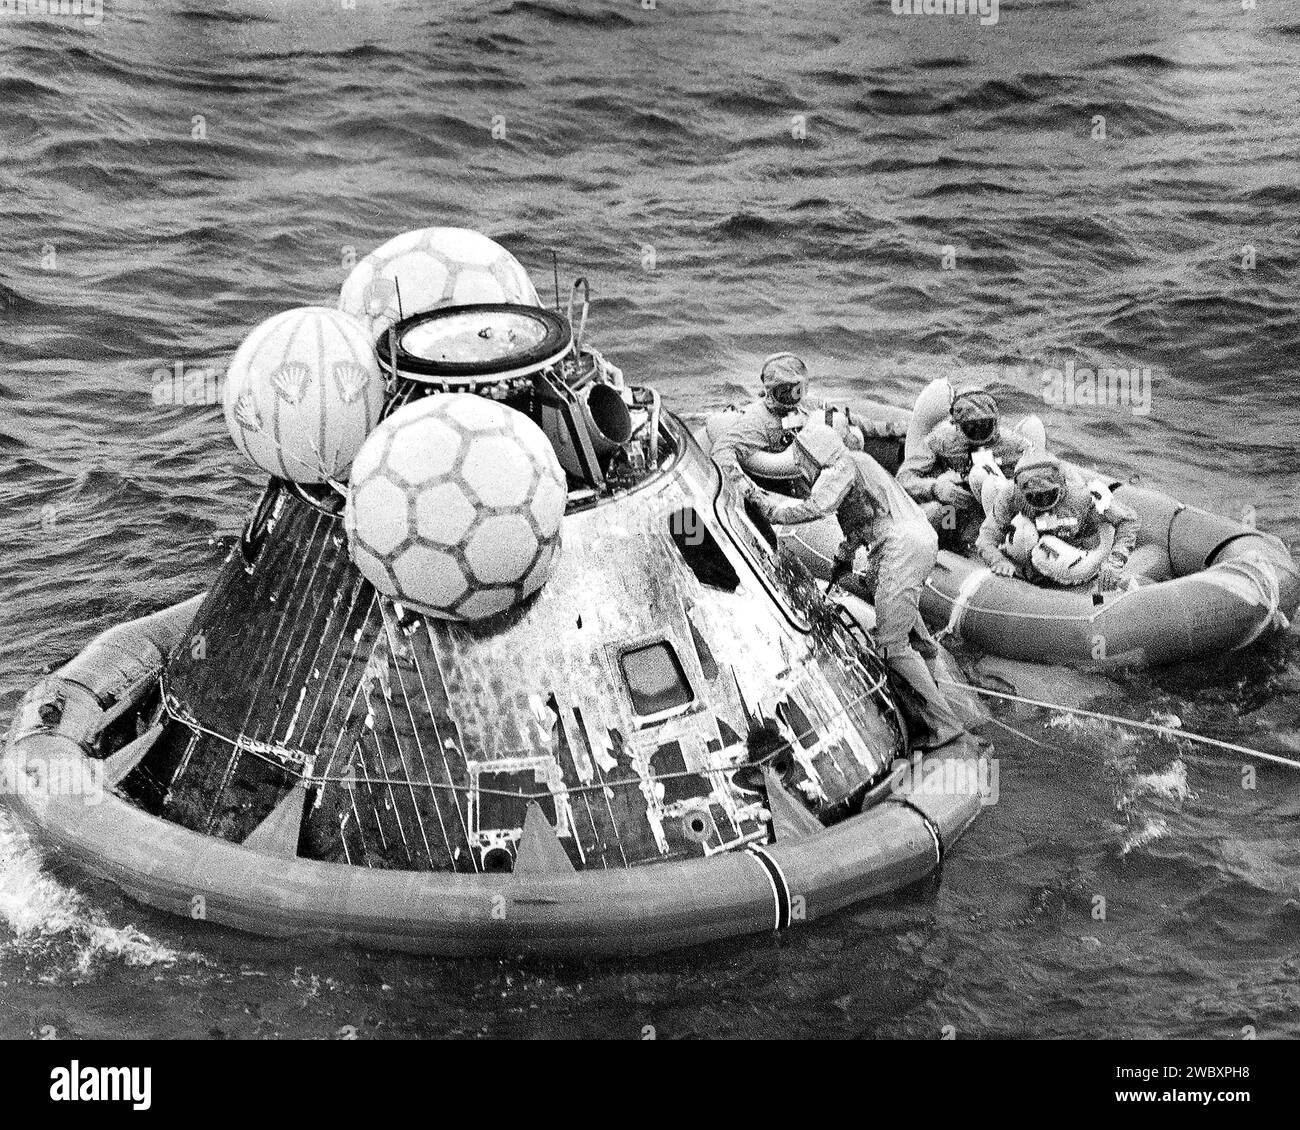 American Astronauts Edwin E. Aldrin, Neil A. Armstrong and Michael Collins in life raft during recovery operation of Command Module Columbia after successful Apollo 11 mission, the first manned lunar mission, Pacific Ocean, NASA, July 24, 1969 Stock Photo